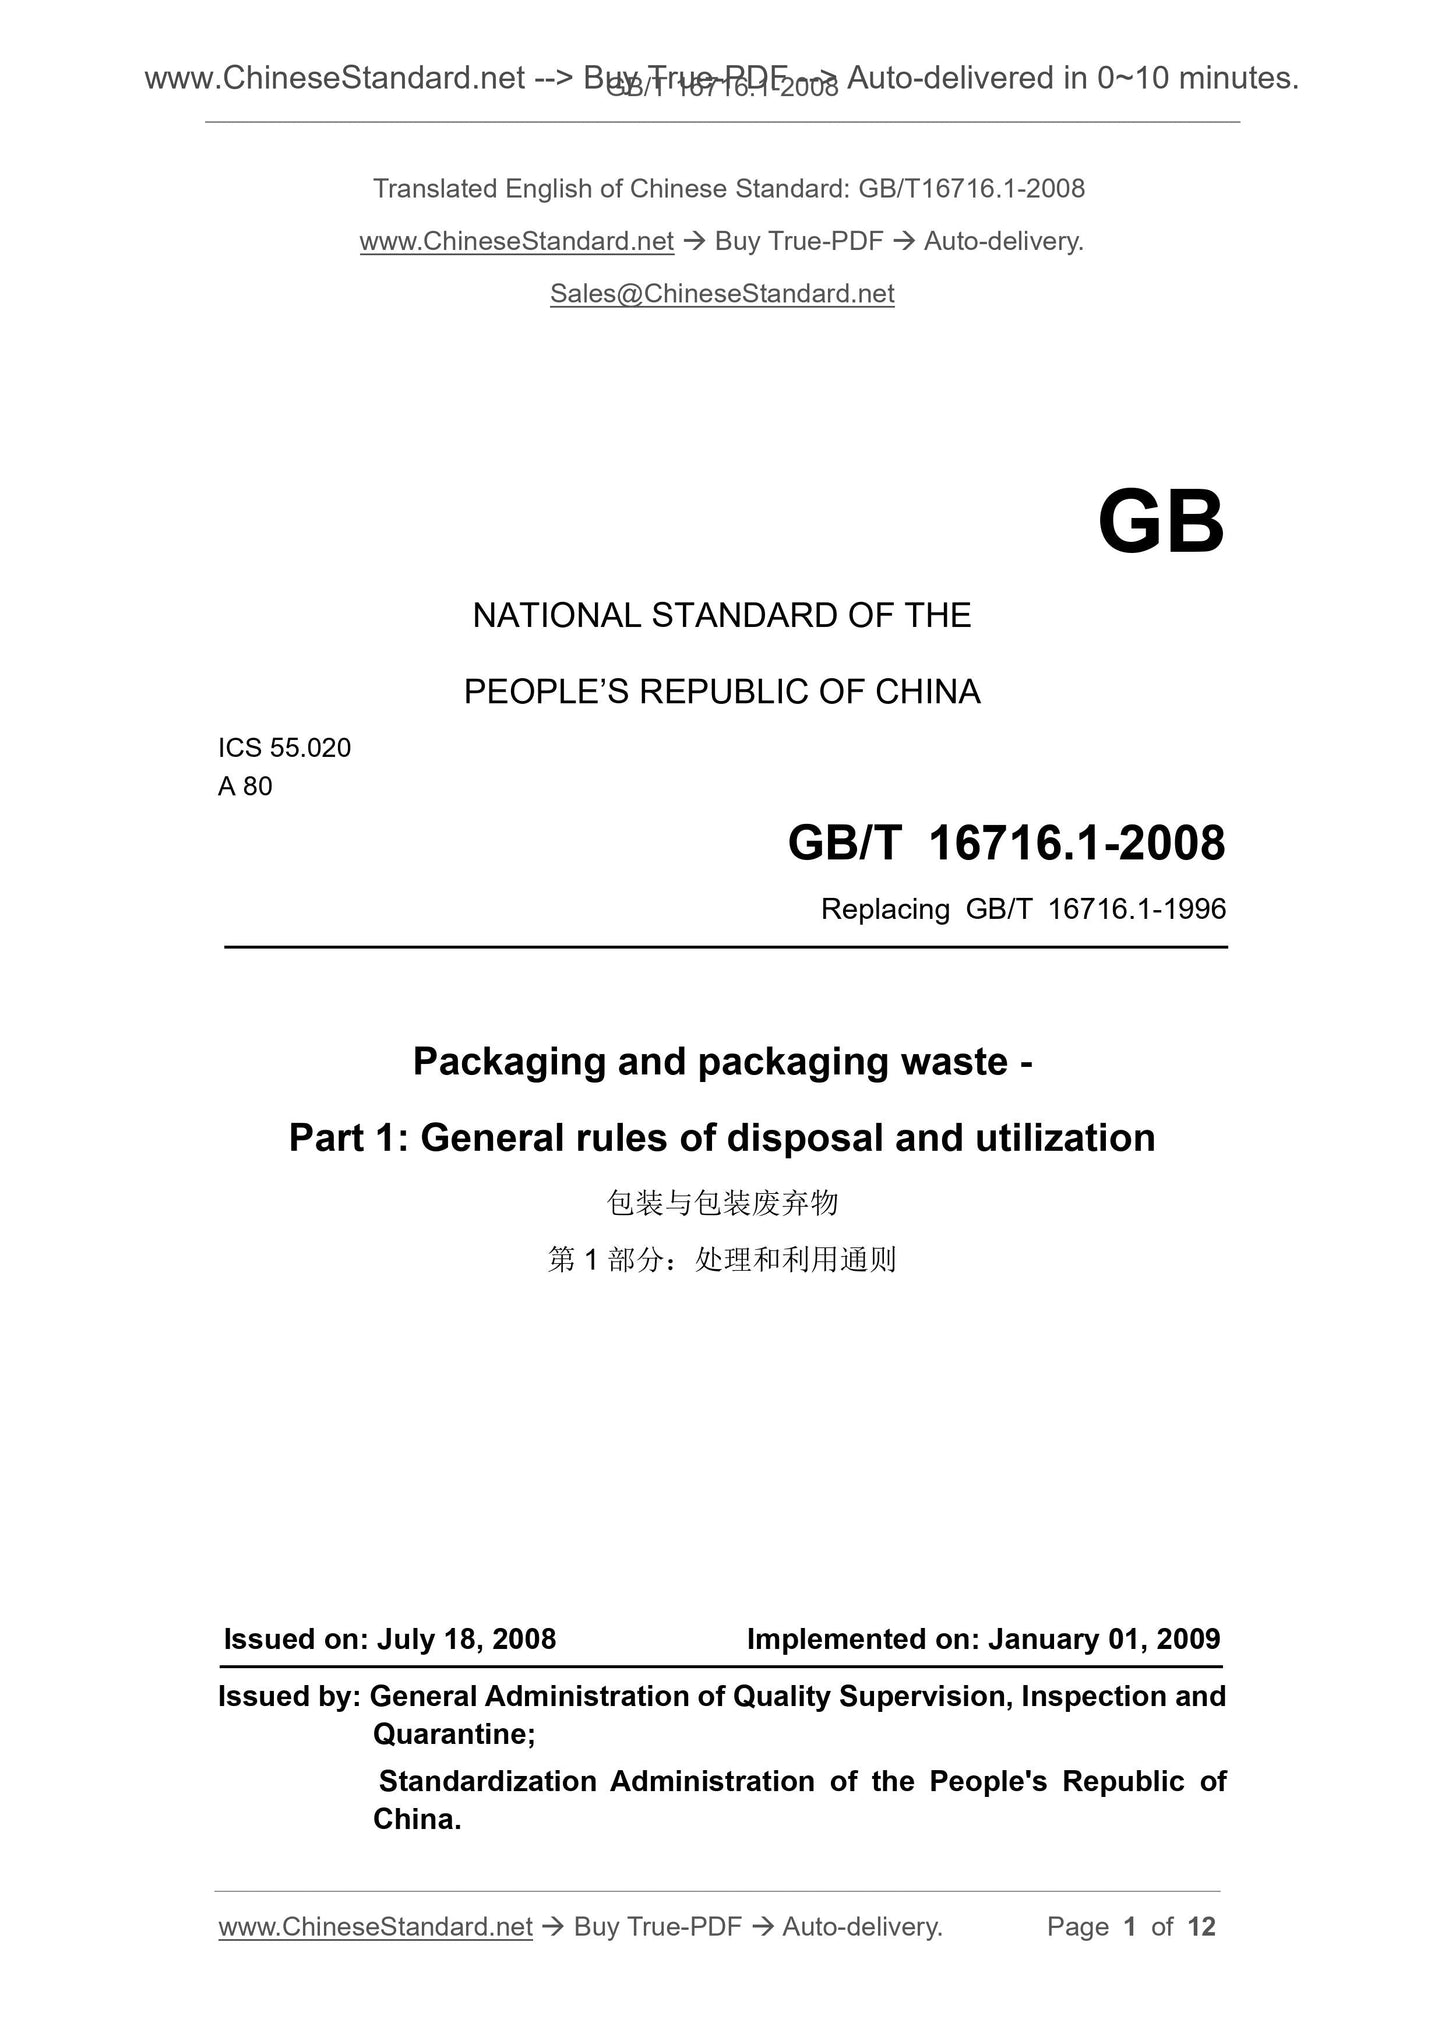 GB/T 16716.1-2008 Page 1